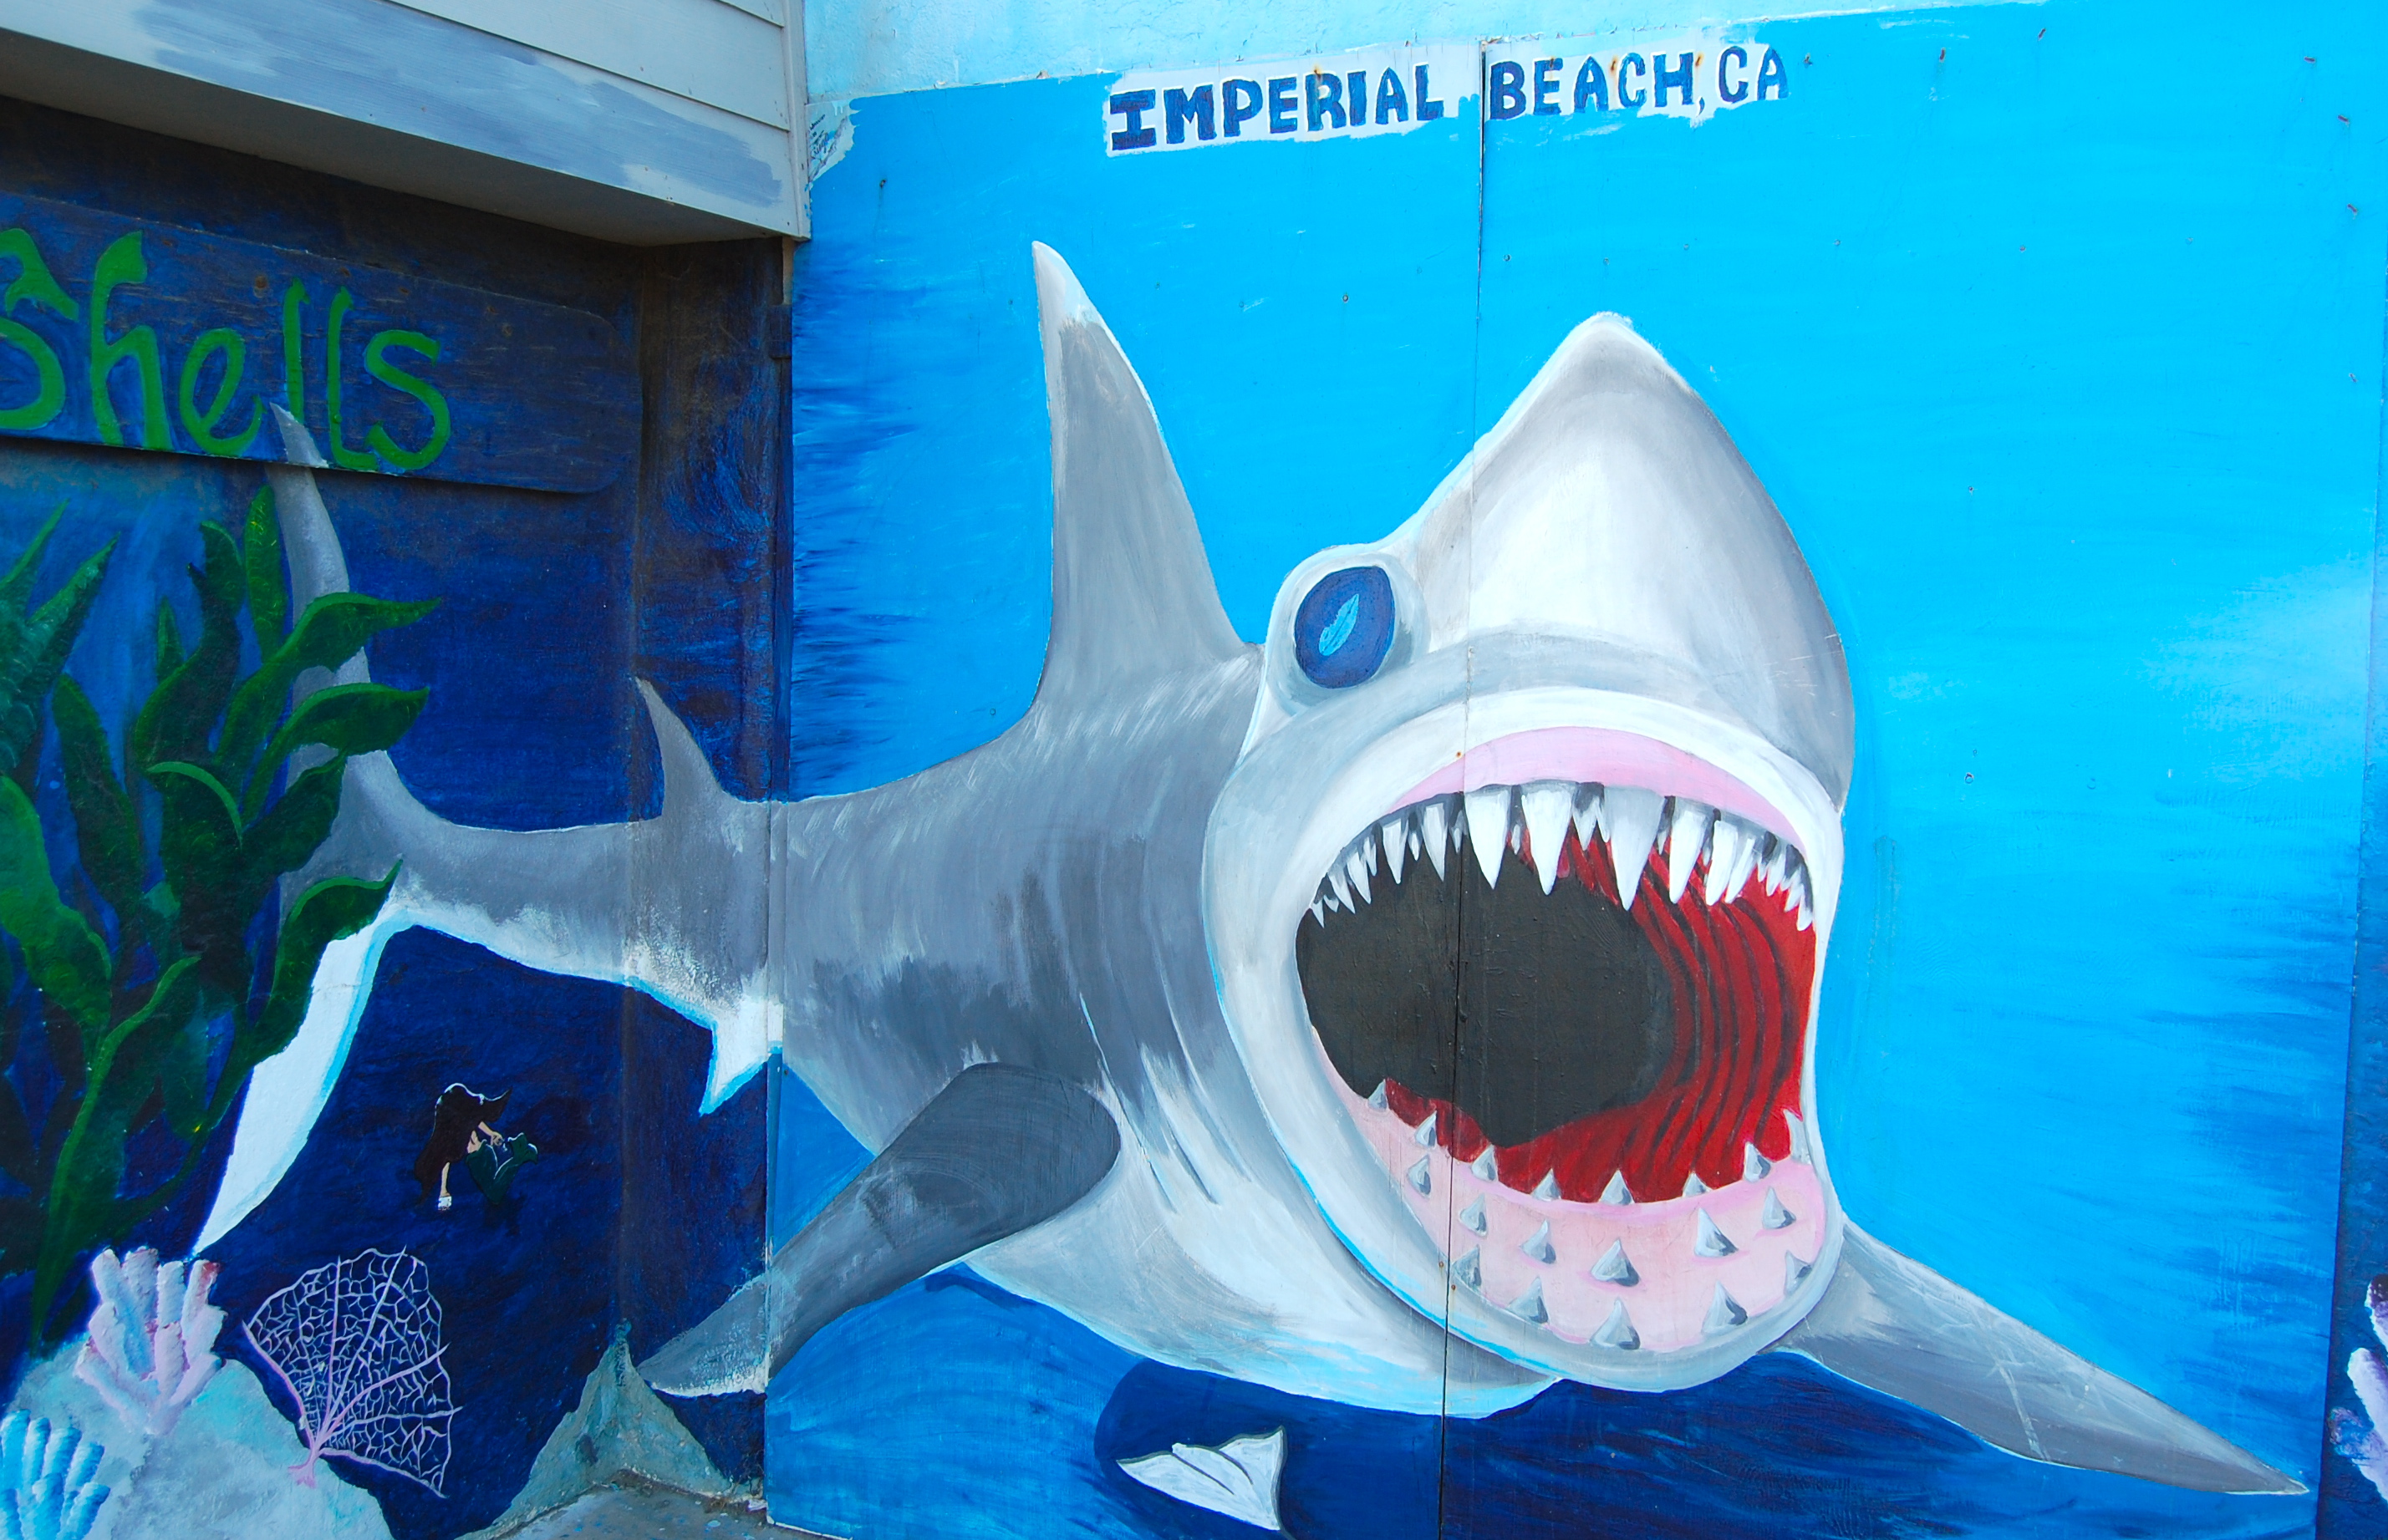 Bibbey's Shell Shop is an IB landmark and this shark is a favorite photo stop for tourists and locals. 